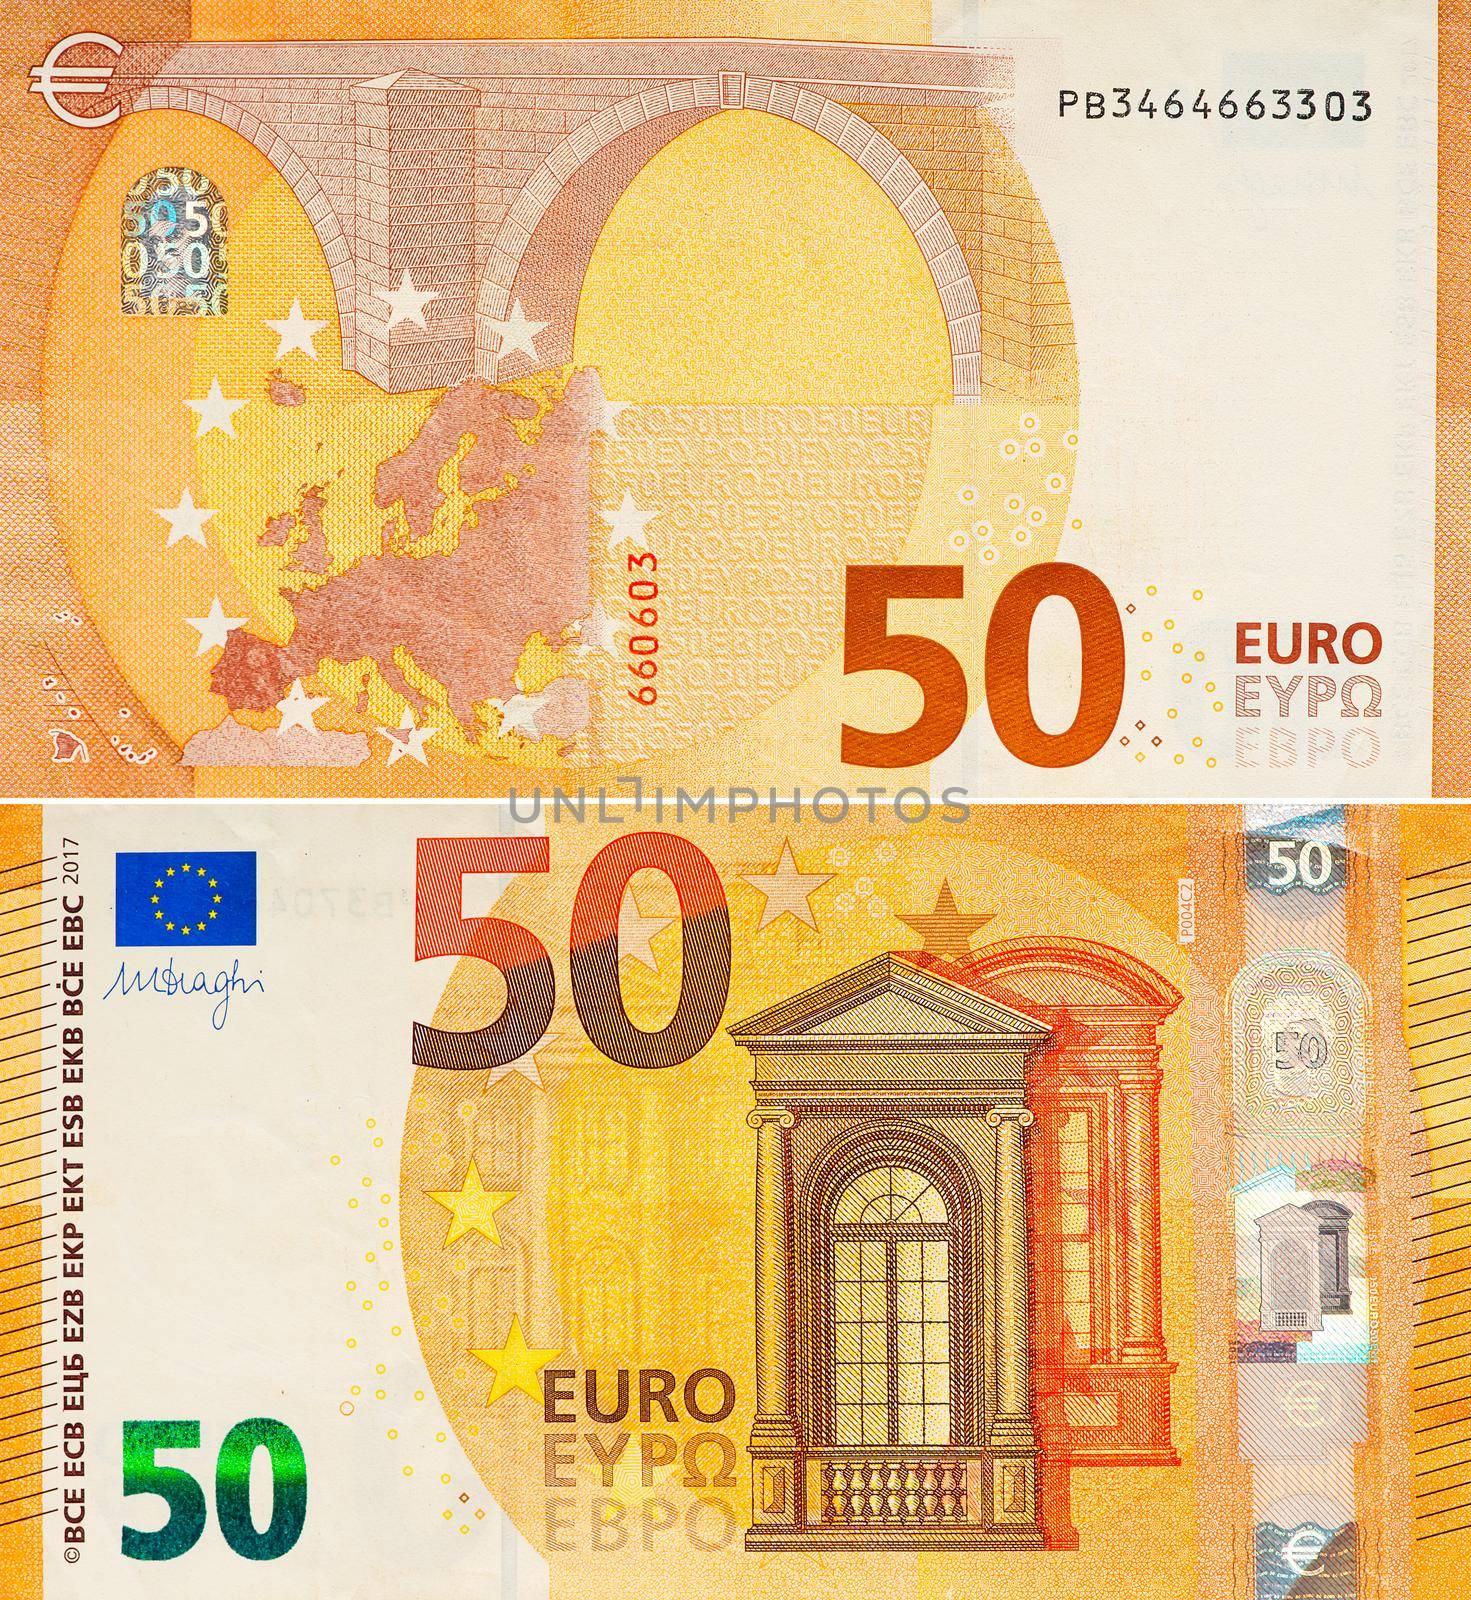 One fifty Euro bill. 50 euro banknote close-up. The euro is the official currency of 19 out of the 27 member states of the European Union